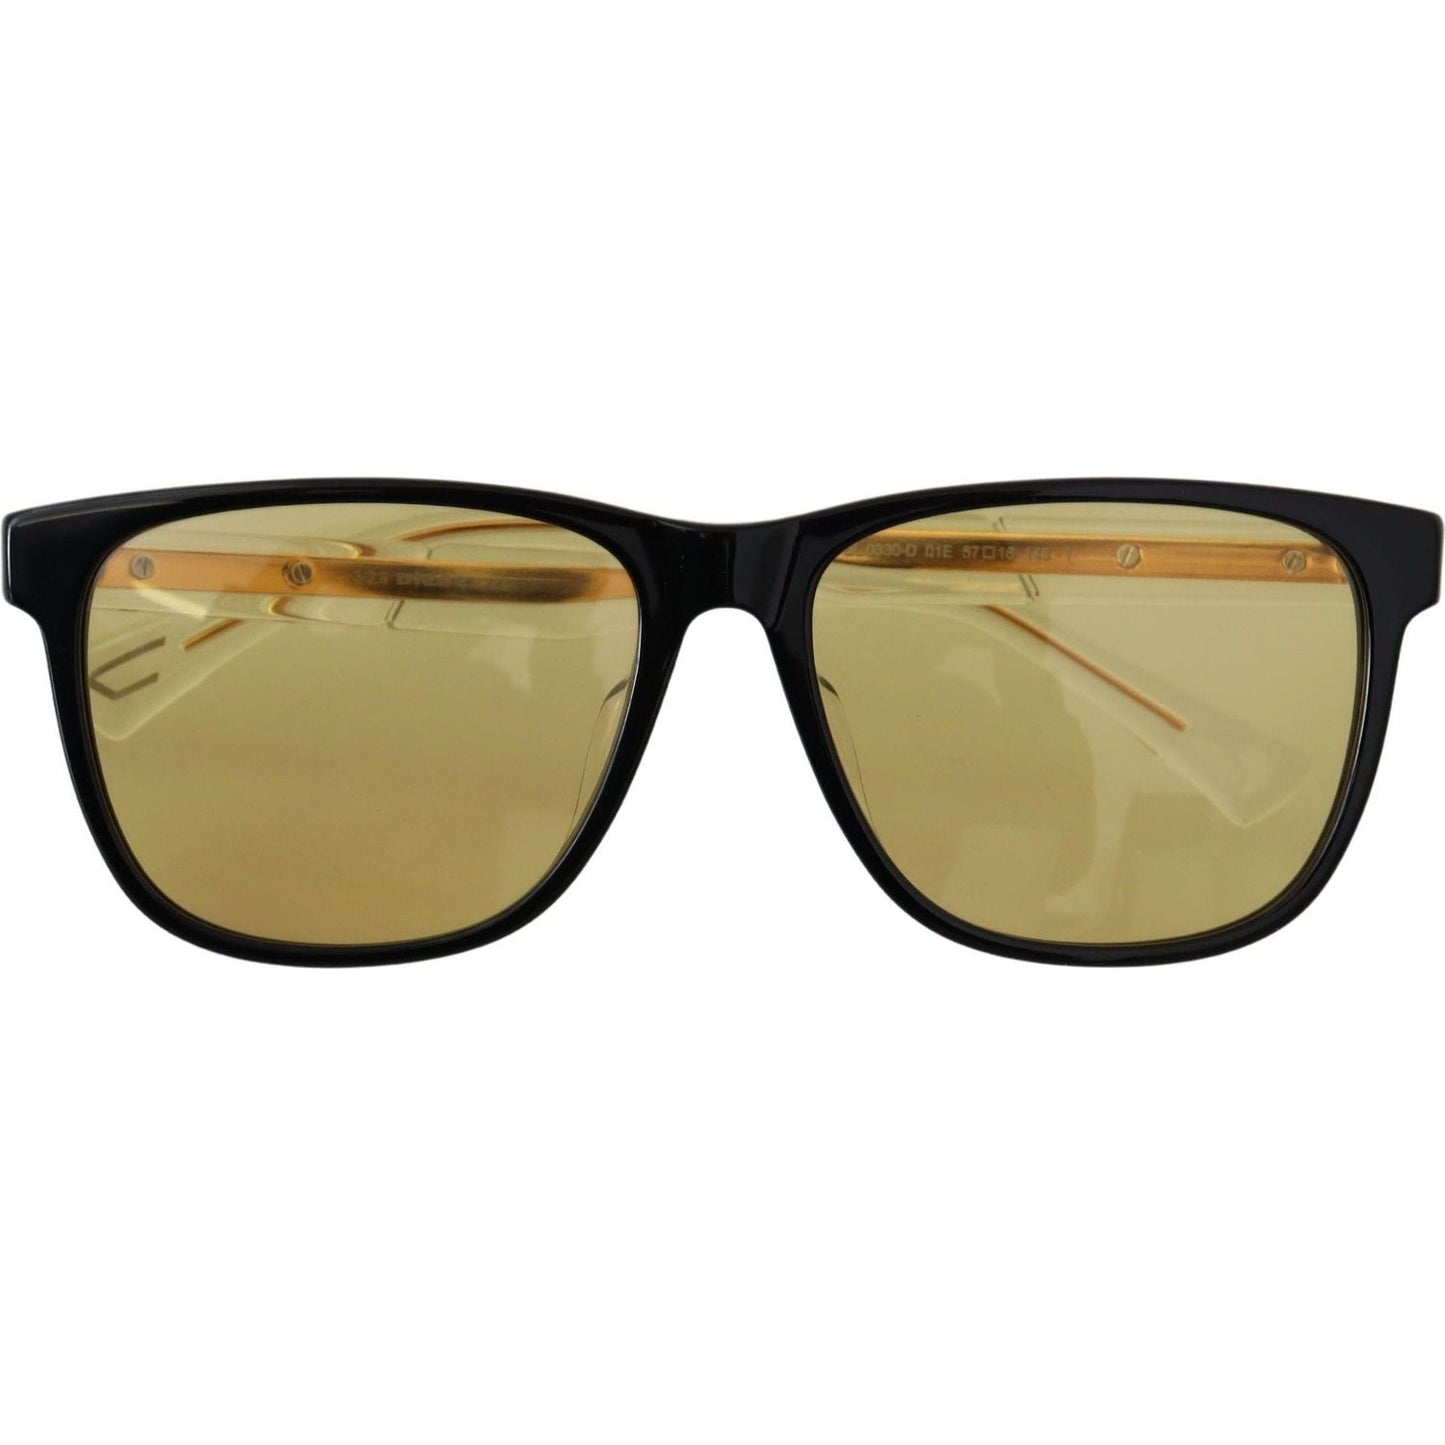 Chic Black Acetate Sunglasses with Yellow Lenses Diesel